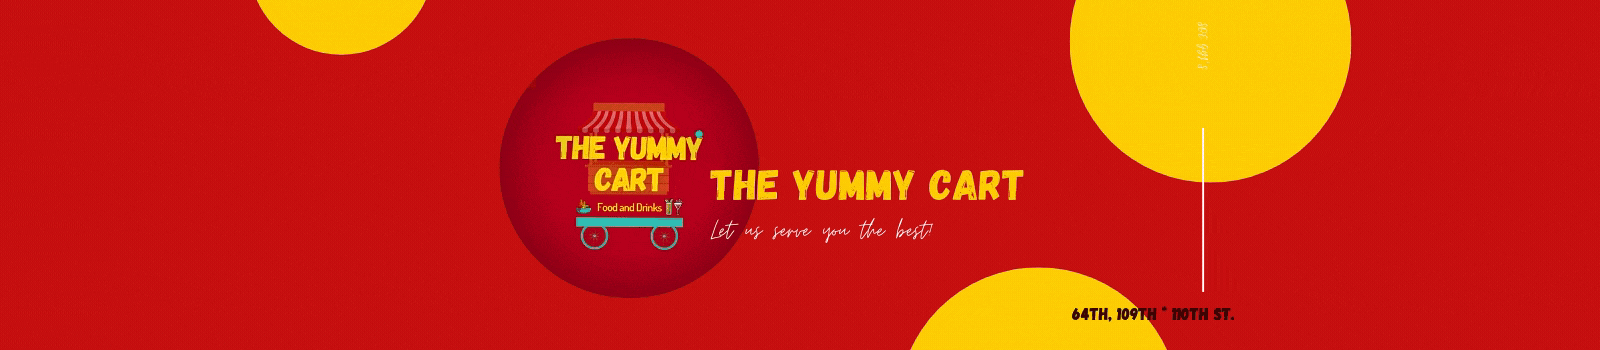 The Yummy Cart